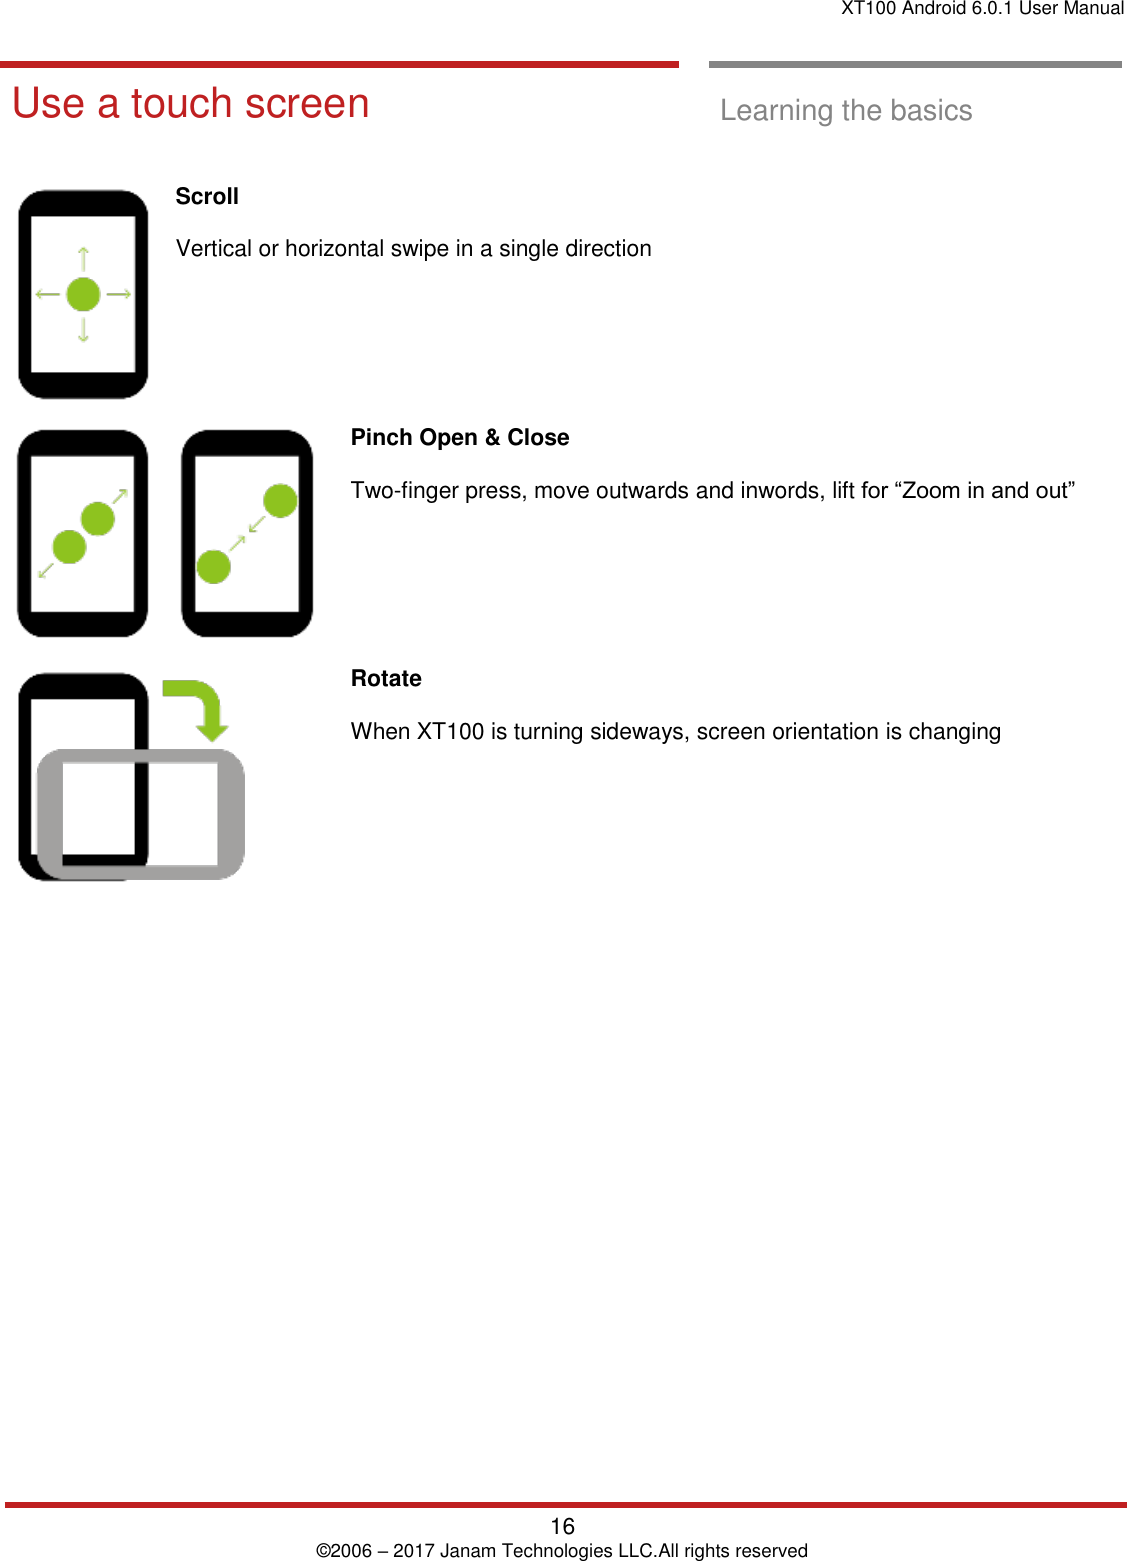 XT100 Android 6.0.1 User Manual   16 © 2006 – 2017 Janam Technologies LLC.All rights reserved  Learning the basics  Use a touch screen  Learning the basics   Scroll   Vertical or horizontal swipe in a single direction   Pinch Open &amp; Close   Two-finger press, move outwards and inwords, lift for “Zoom in and out”  Rotate   When XT100 is turning sideways, screen orientation is changing      